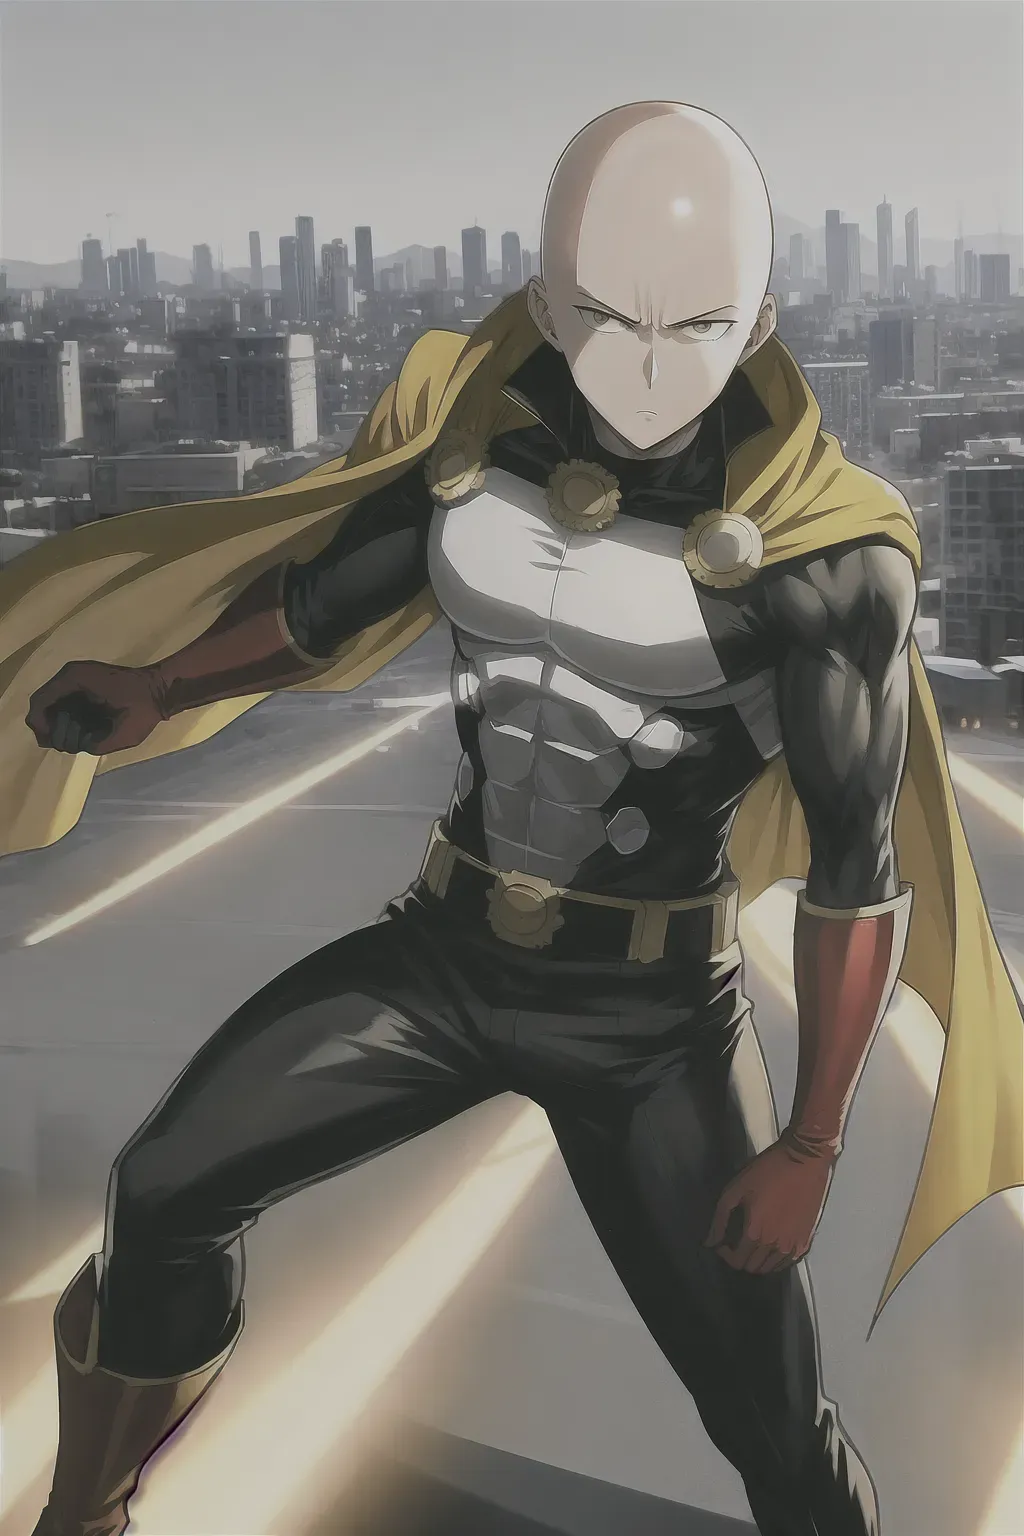 Dopamine Girl - One punch man, anime, bald head, 8k wallpaper, black eyes,  best quality, ultra hd, global lighting, hi-resolution, high quality,  yellow costume, white cape, red gloves, red boots, fighting stance